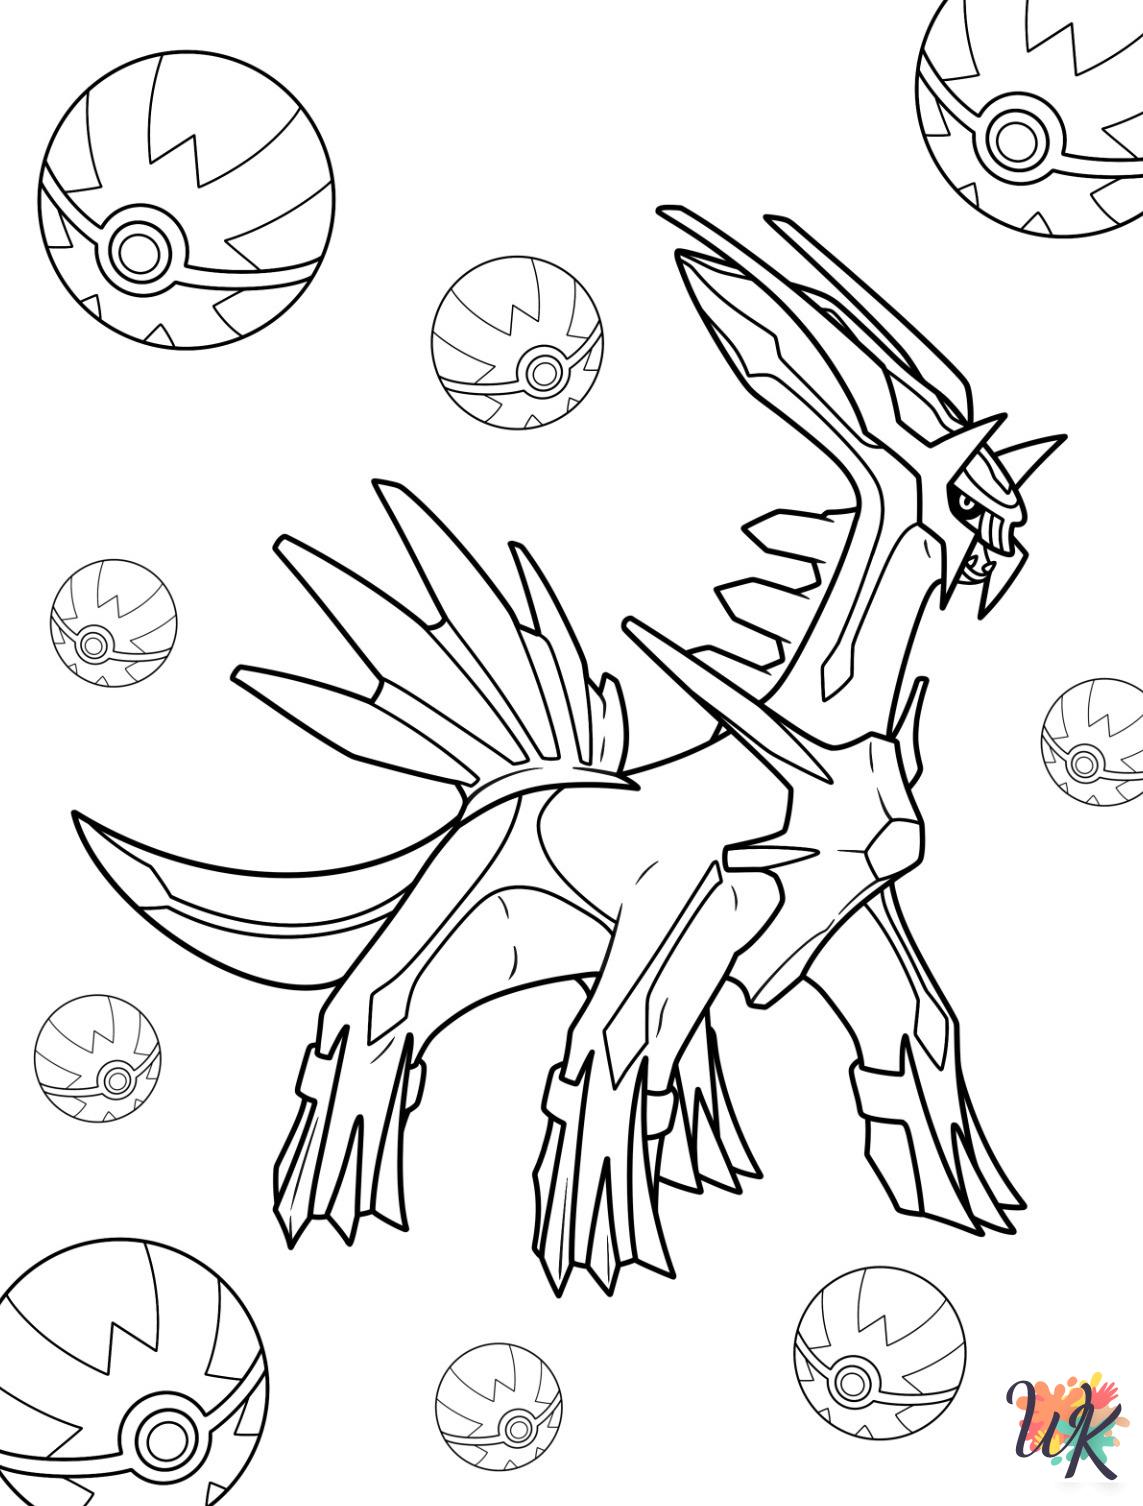 Legendary Pokemon cards coloring pages